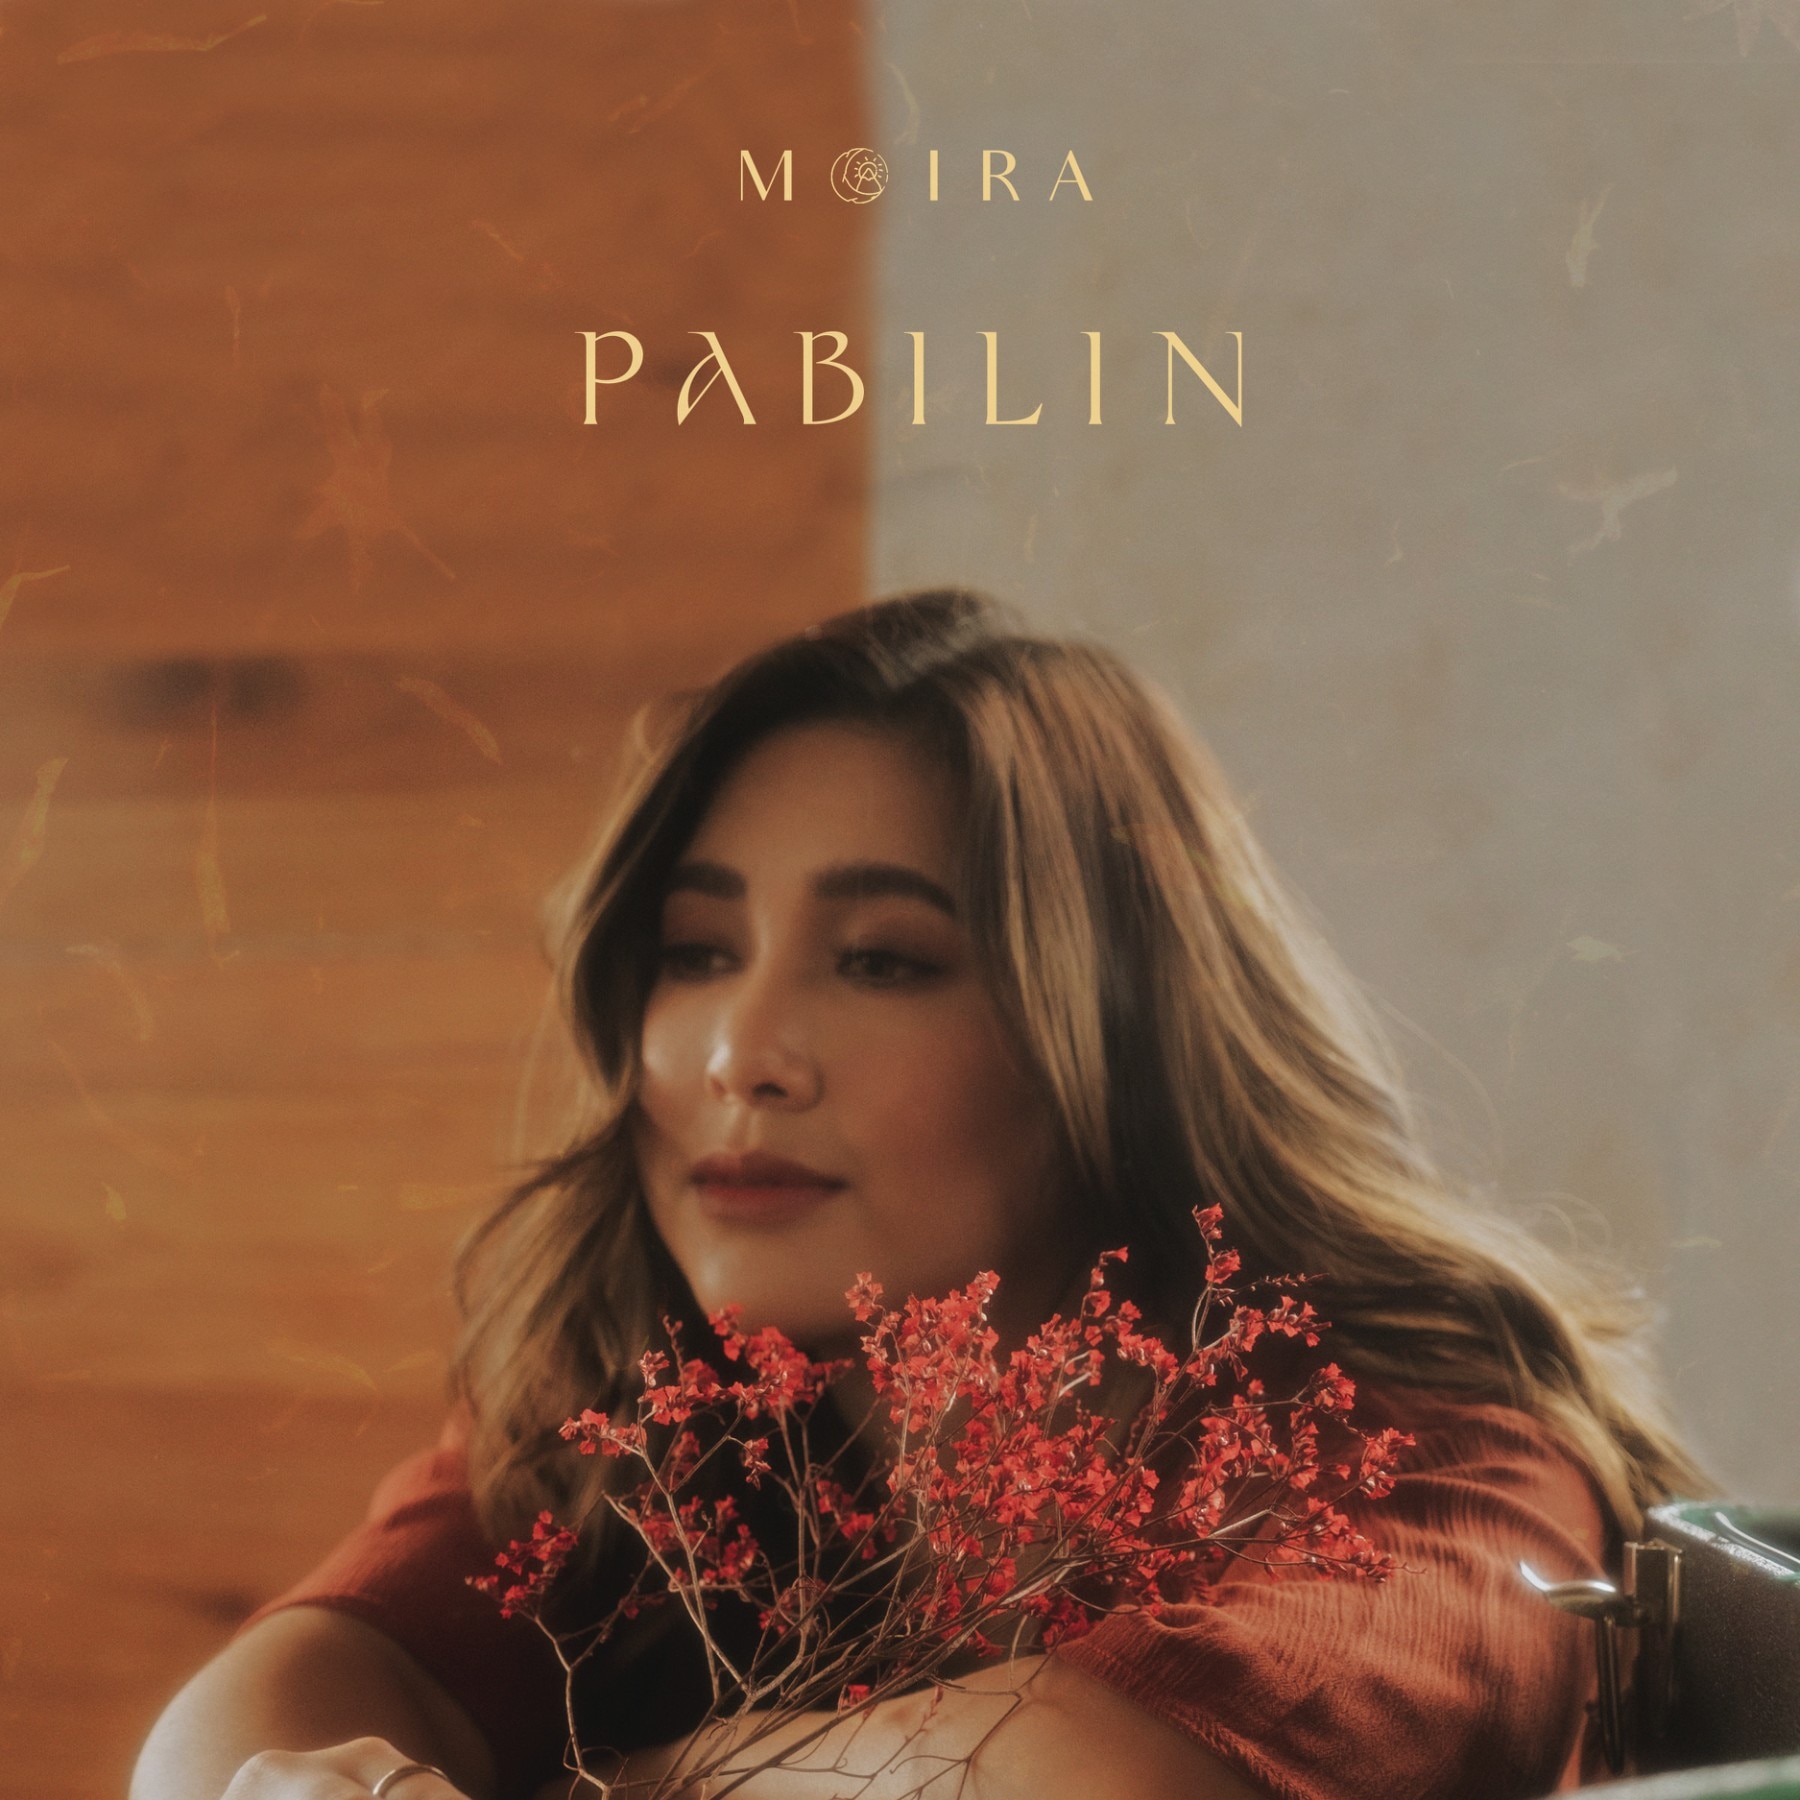 Pabilin by Moira dela Torre